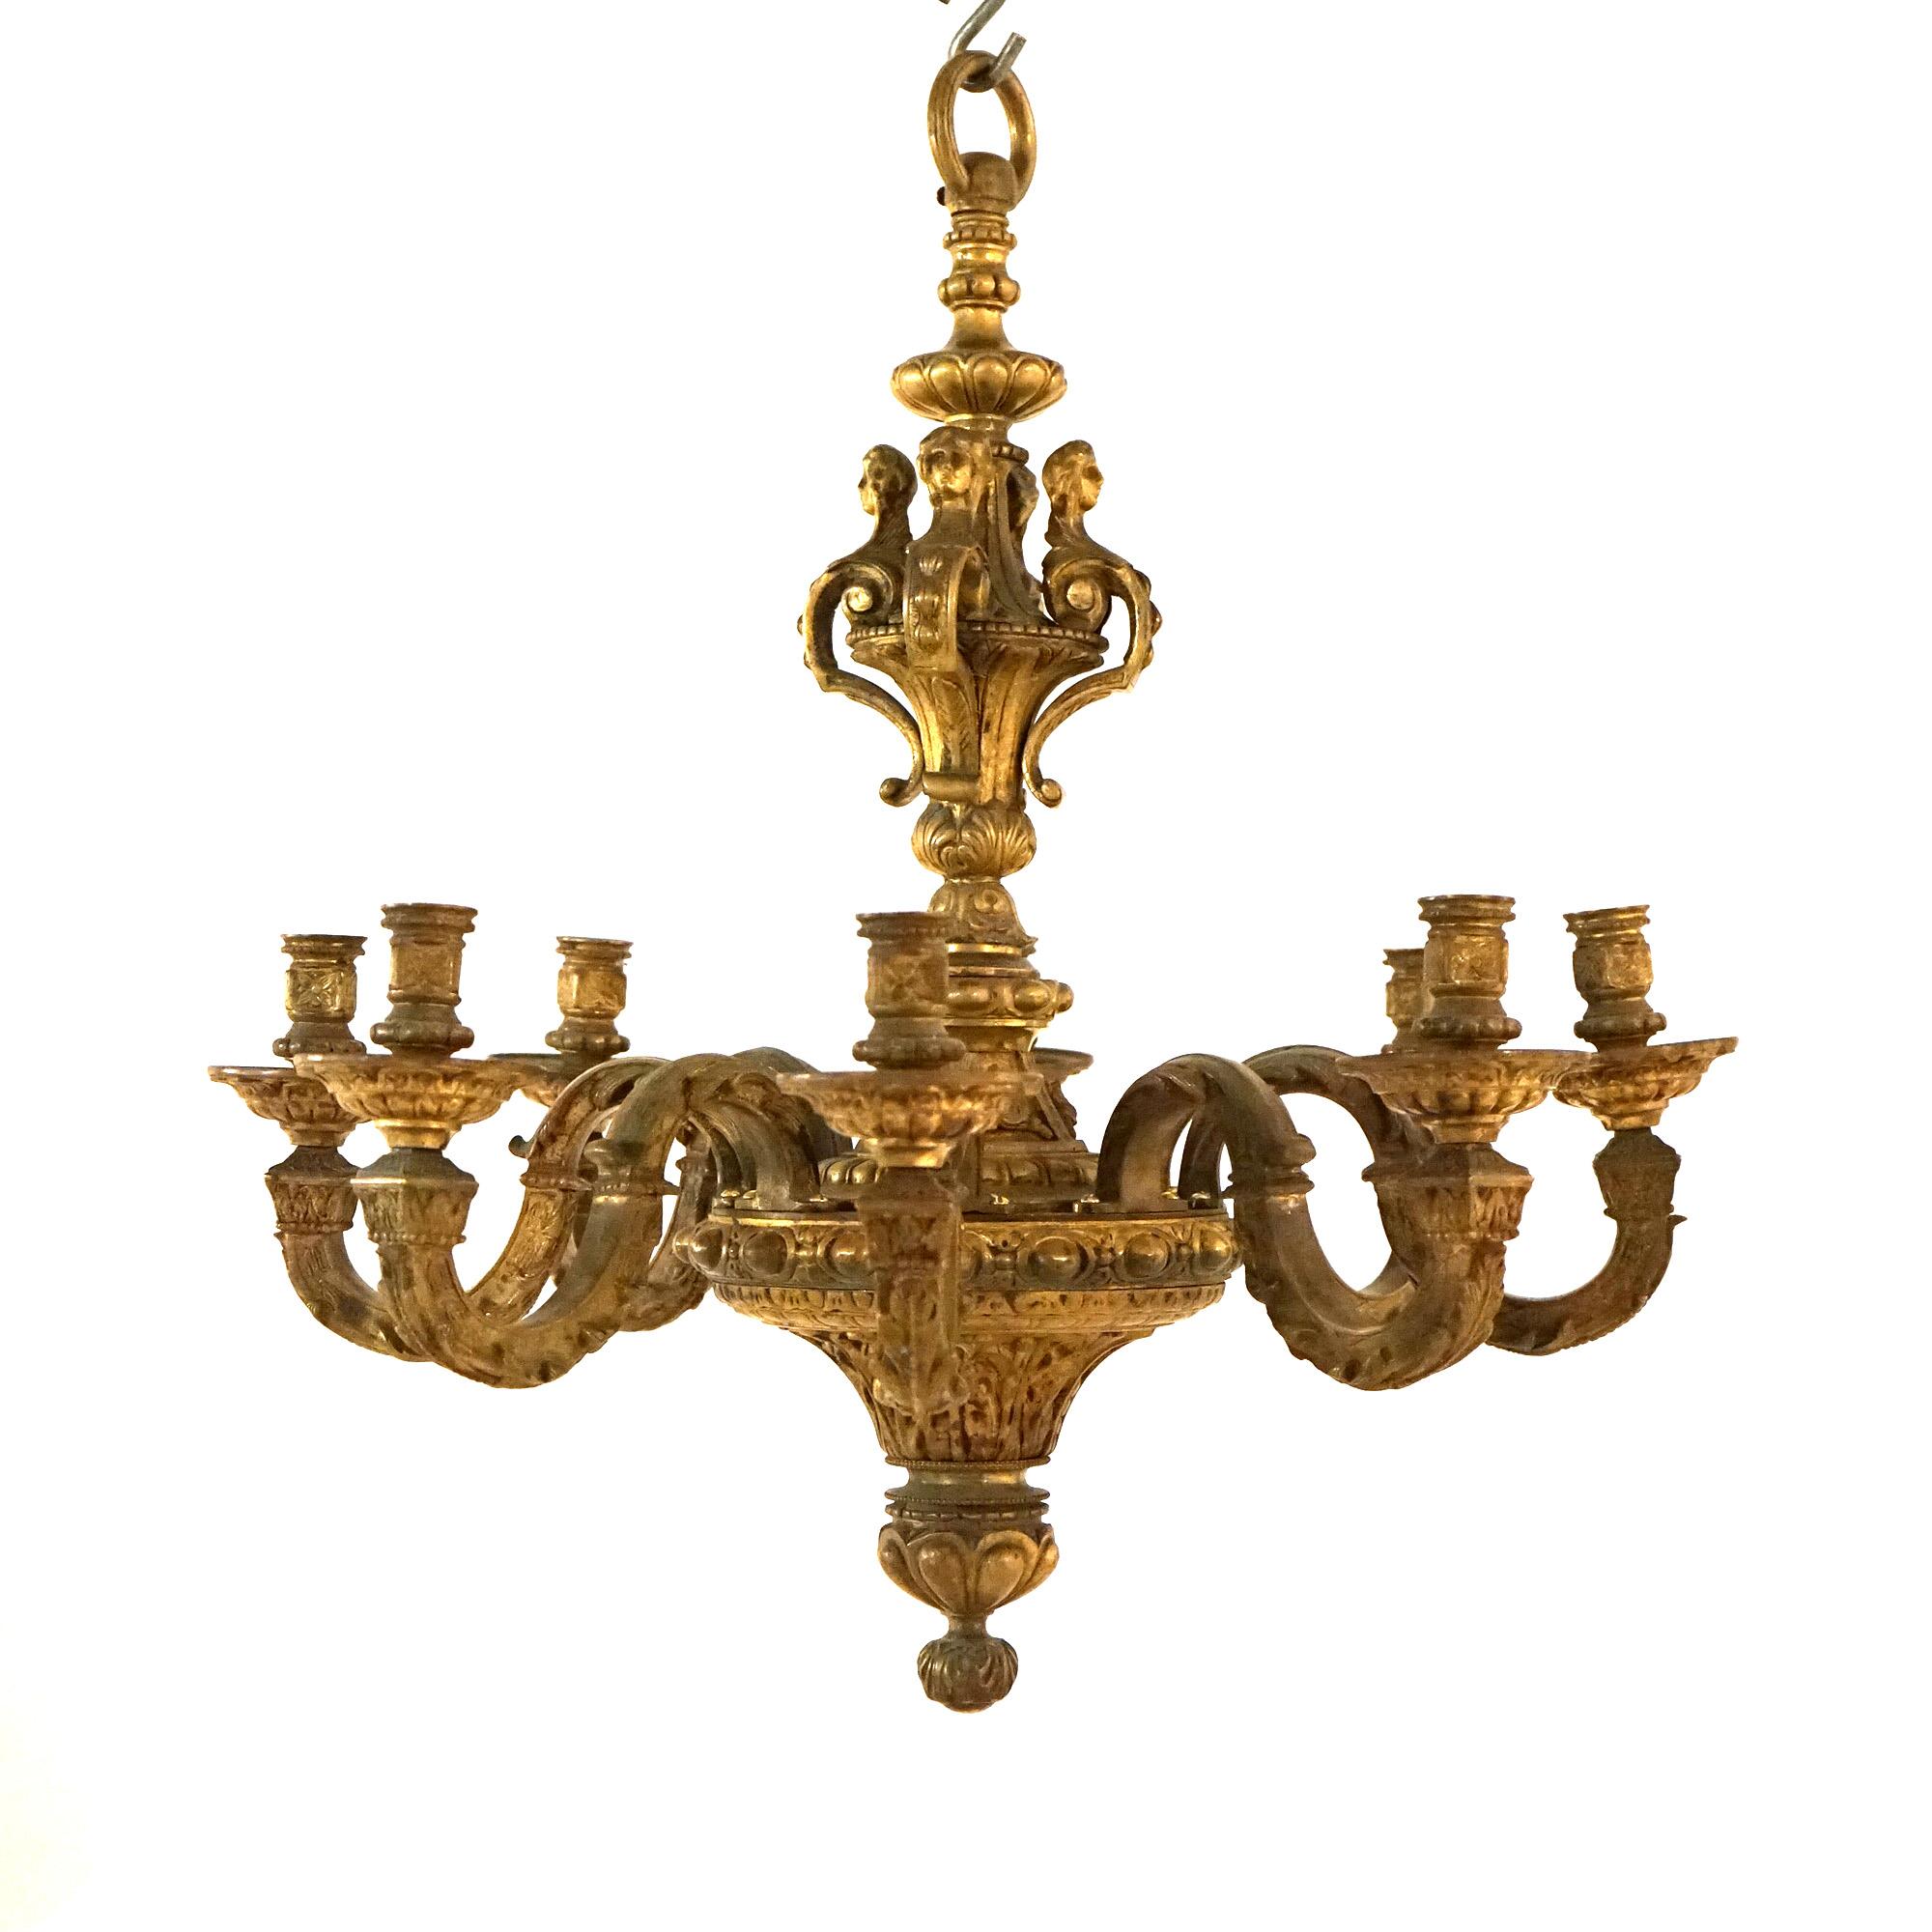 An antique Caldwell French Louis XIV figural candelabra chandelier offers cast metal construction with upper having female caryatids over foliate embossed base with eight scroll form arms terminating in candle sockets, 19thC

Measures - 29.5